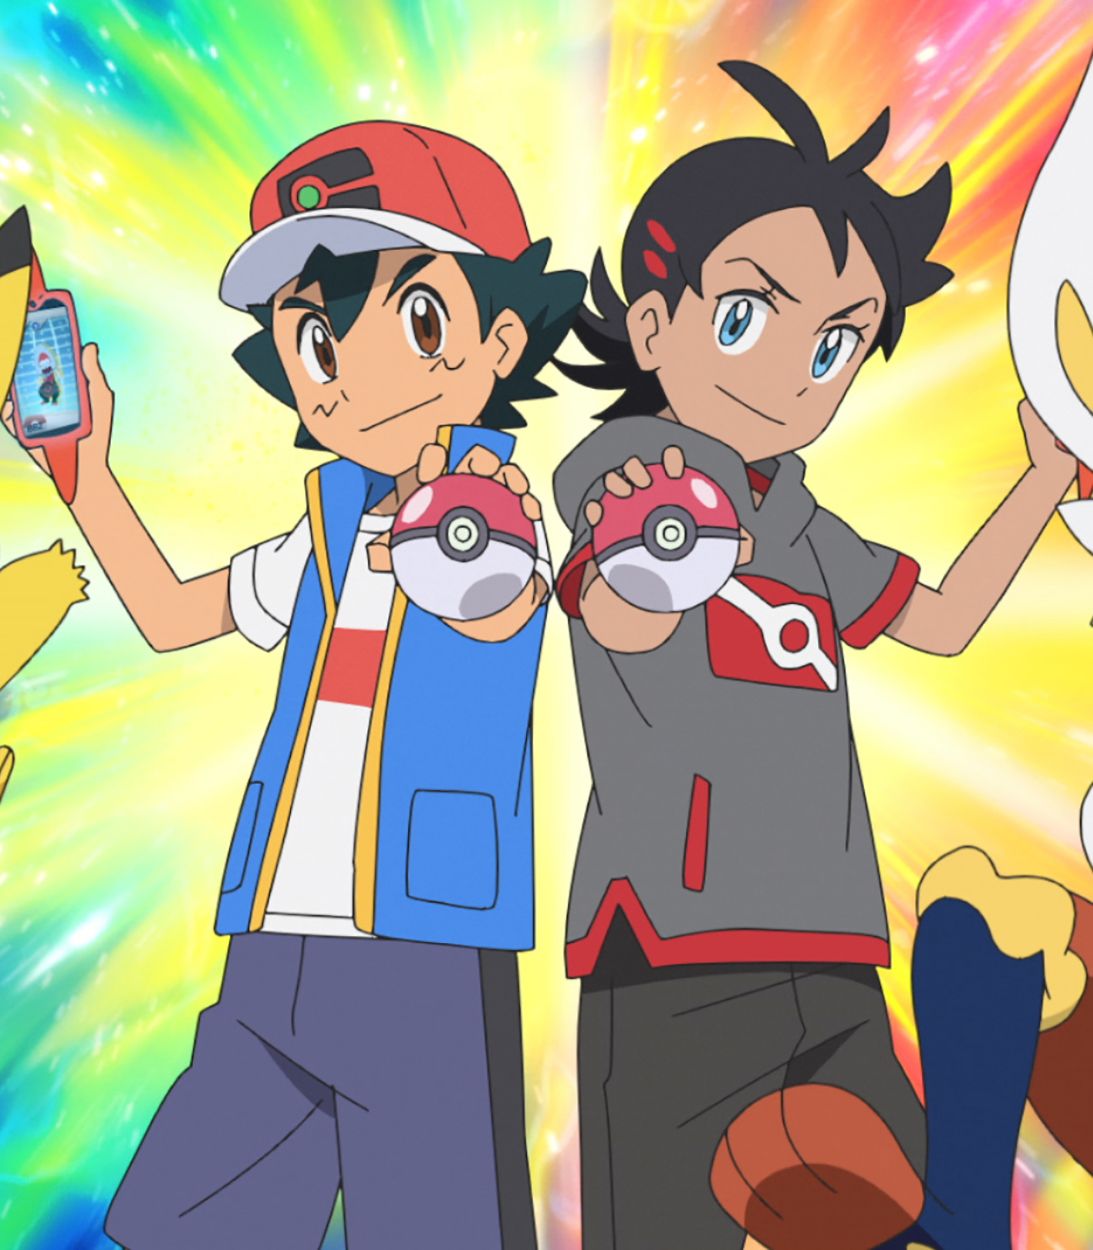 Ash Ketchum and Goh in Pokémon Master Journeys: The Series.